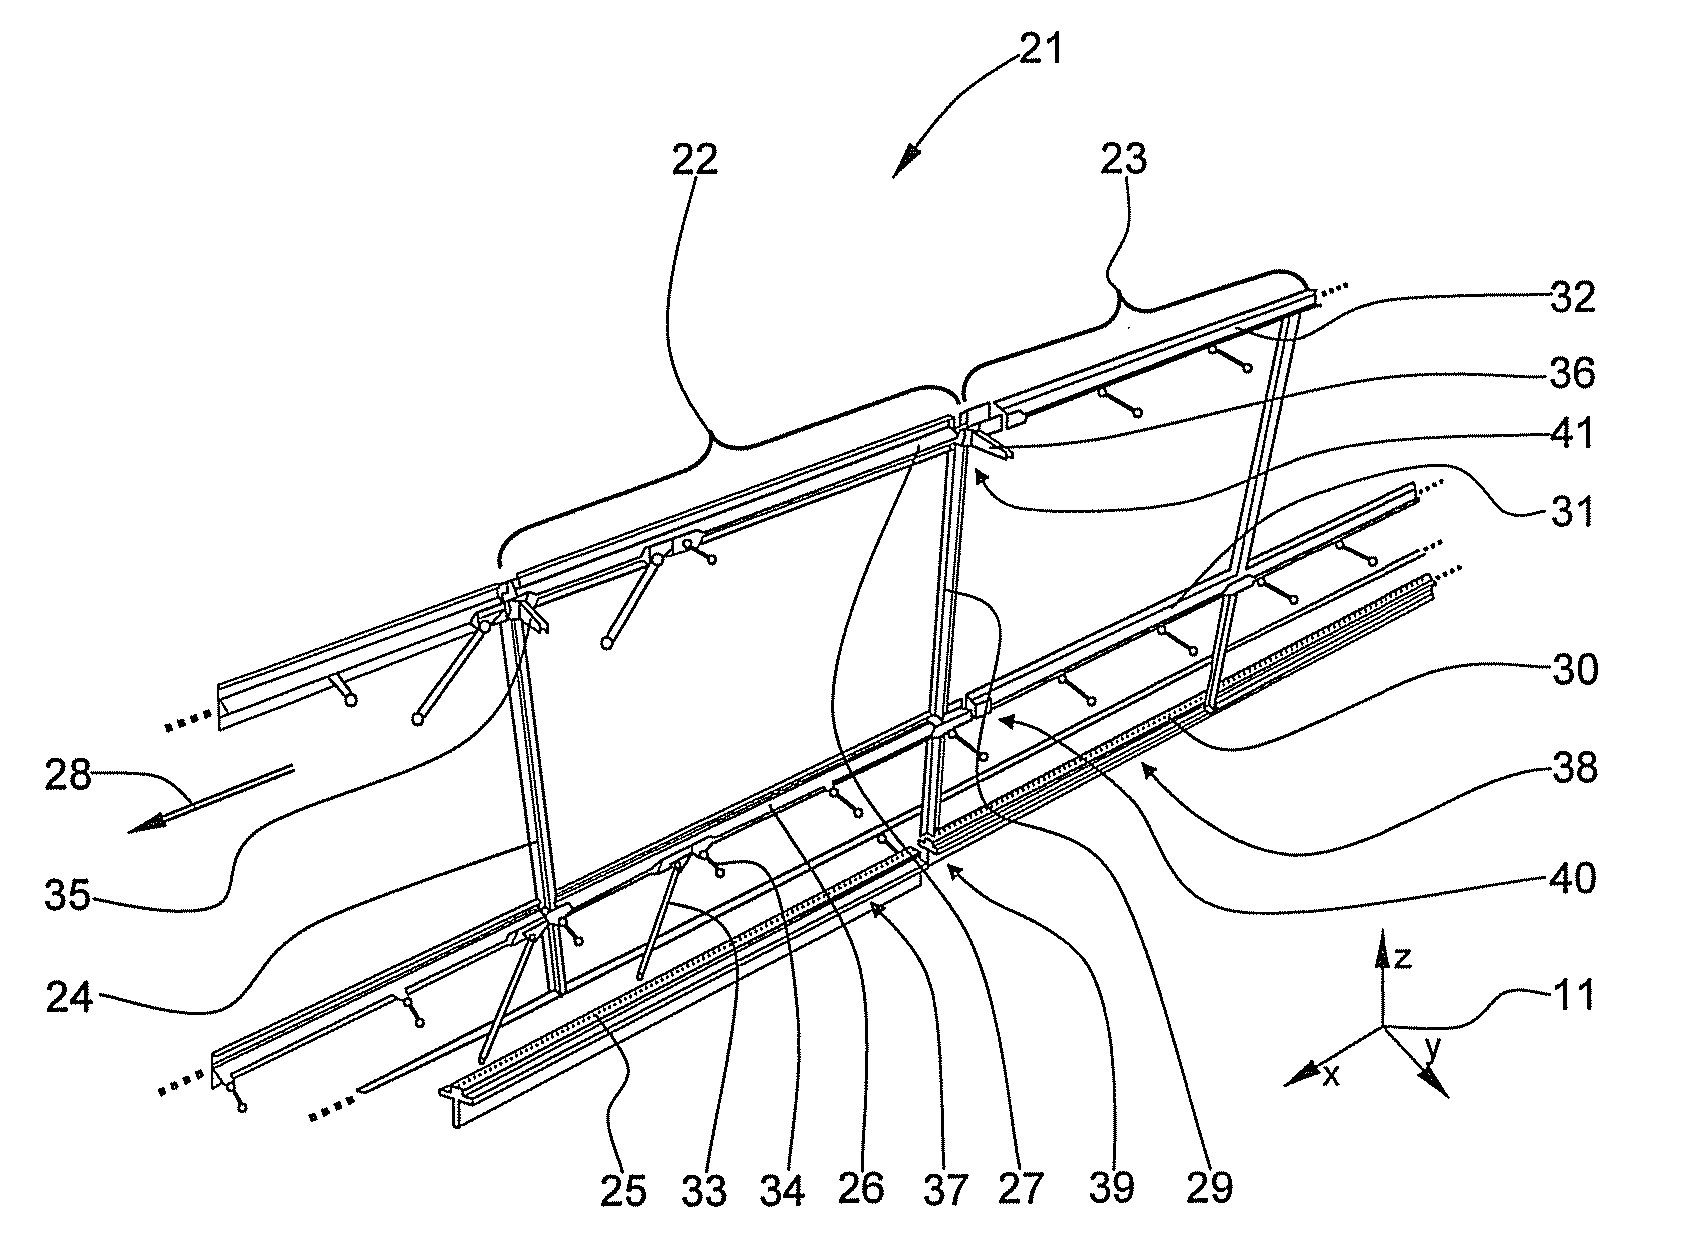 Load introduction structure, in particular a lining frame, for an aircraft